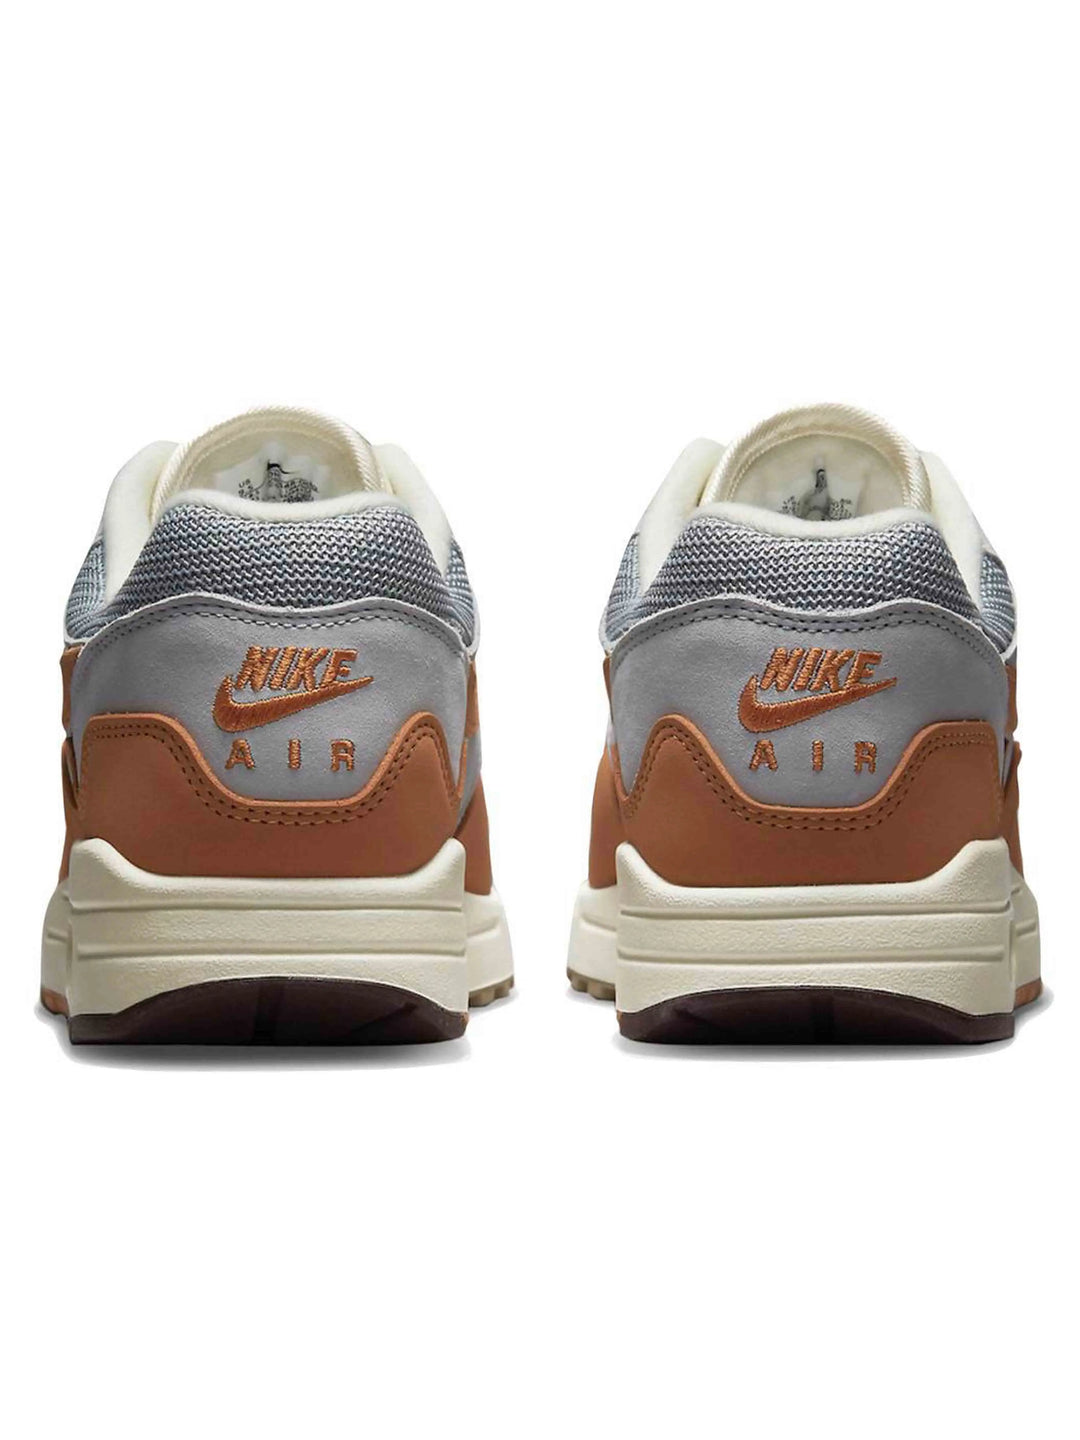 Nike Air Max 1 Patta Waves Monarch [with Bracelet] Prior